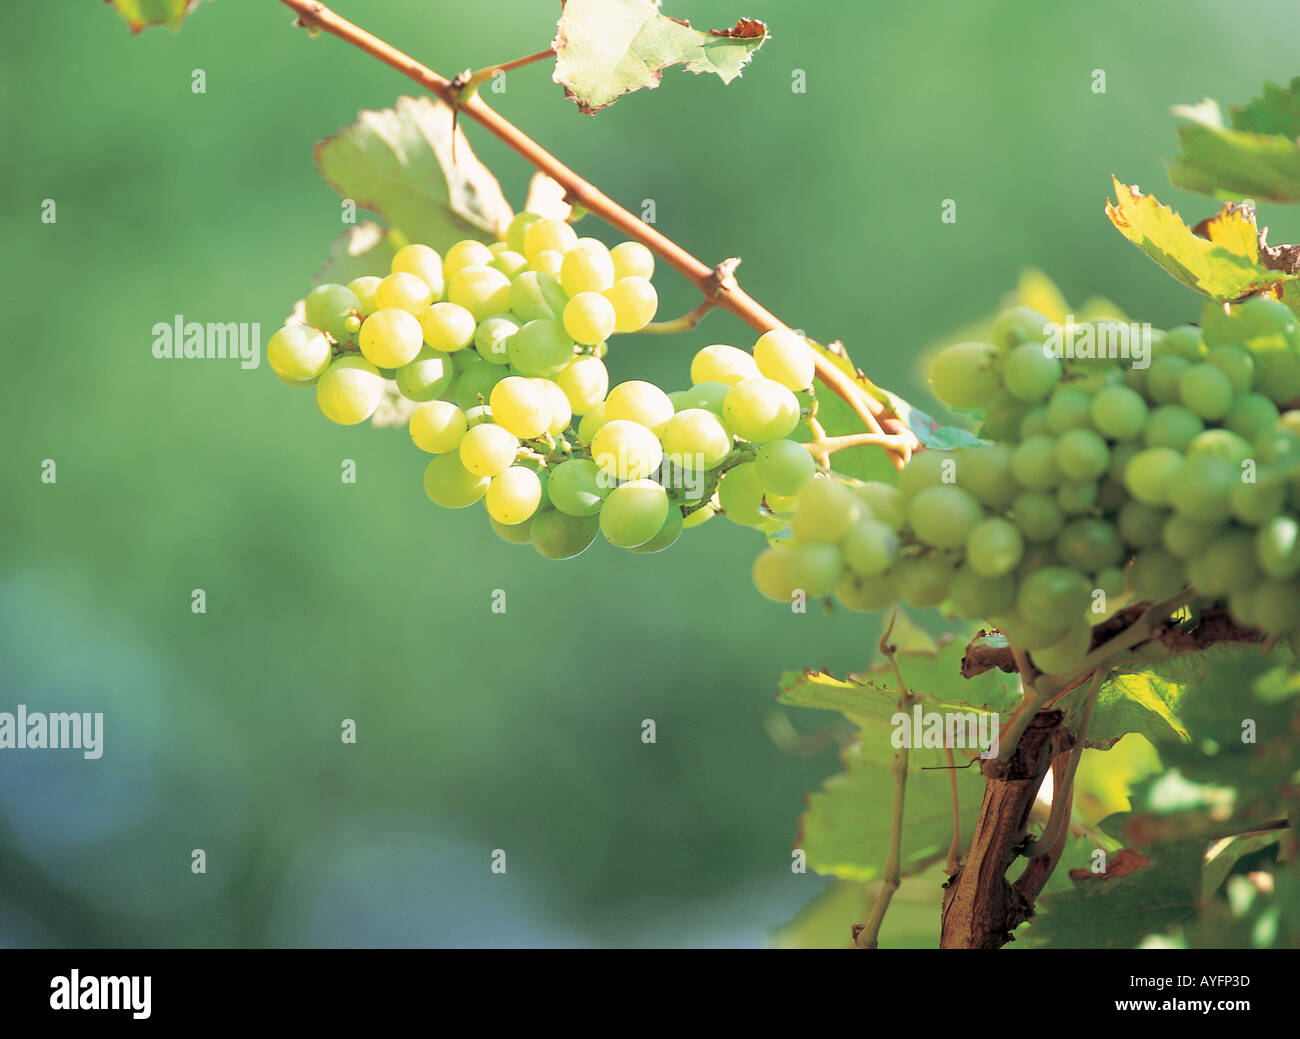 Grapes with Cane Stock Photo